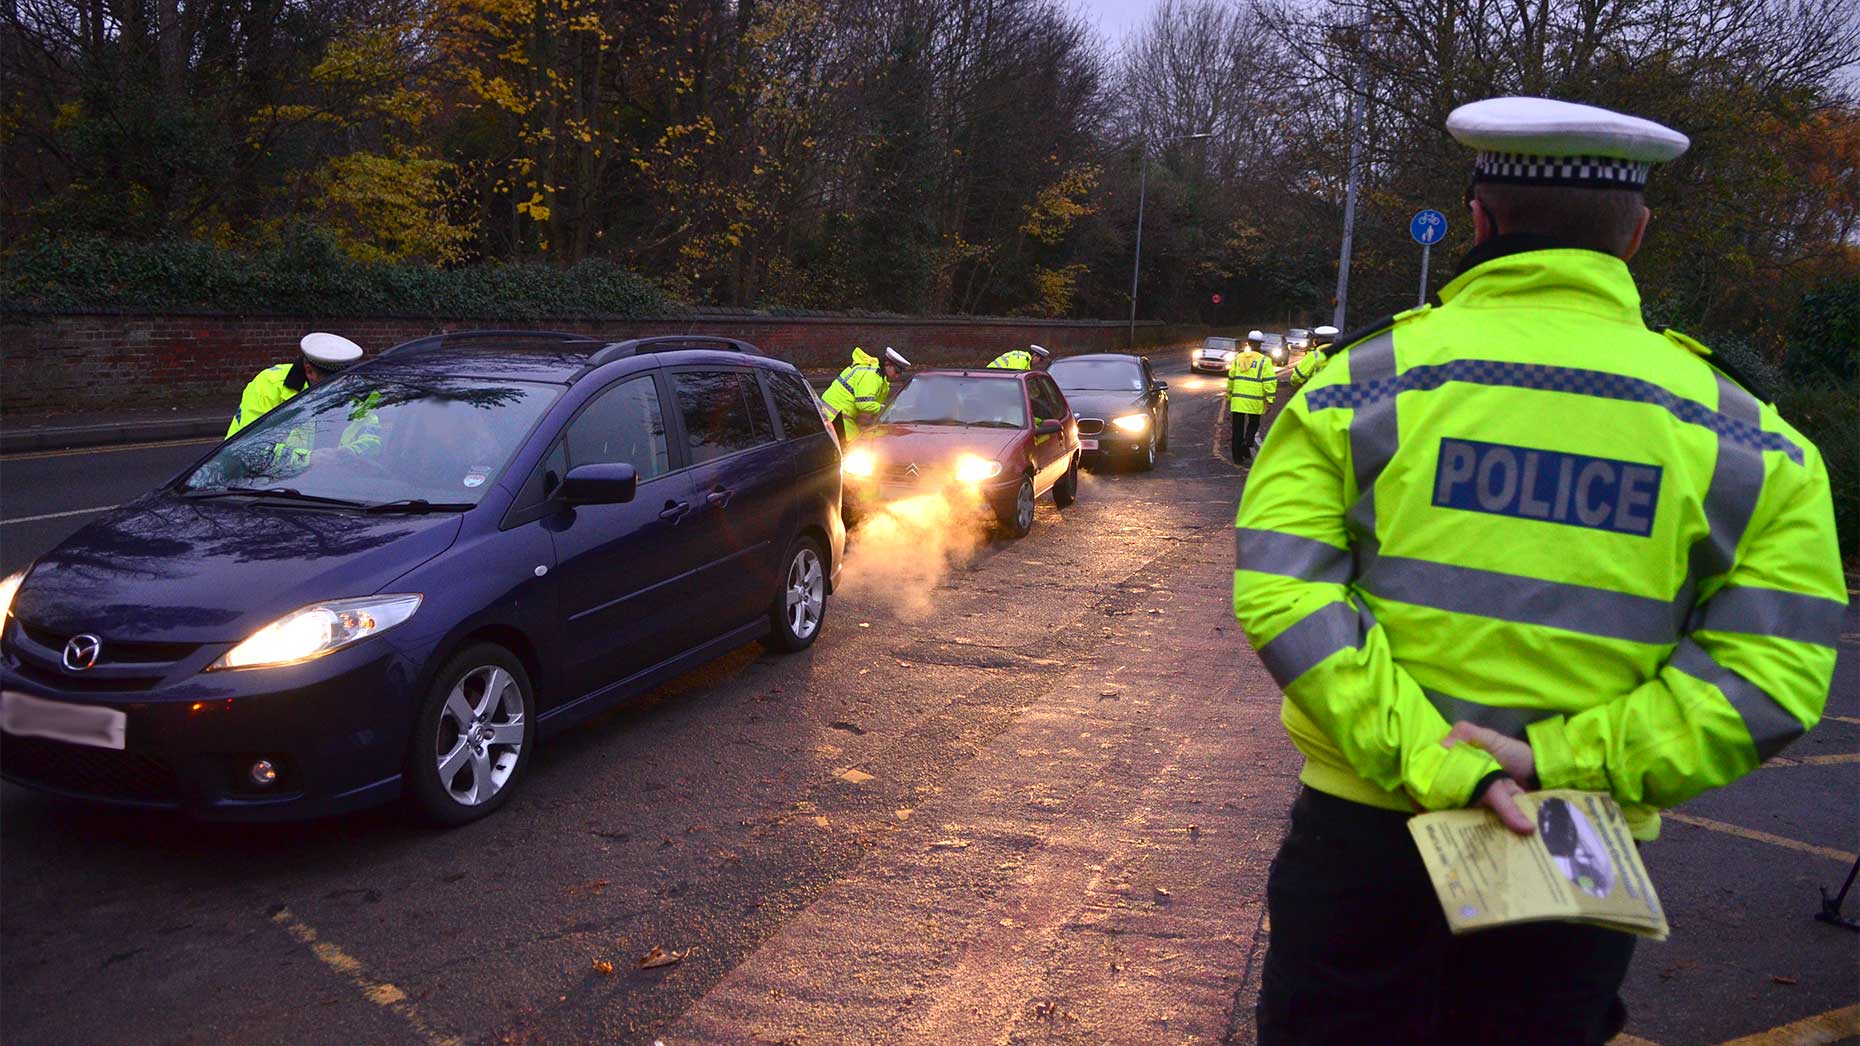 Lincolnshire Police launched their Christmas anti drink driving campaign on Skellingthorpe Road in Lincoln on December 3. Photo: Steve Smailes for The Lincolnite